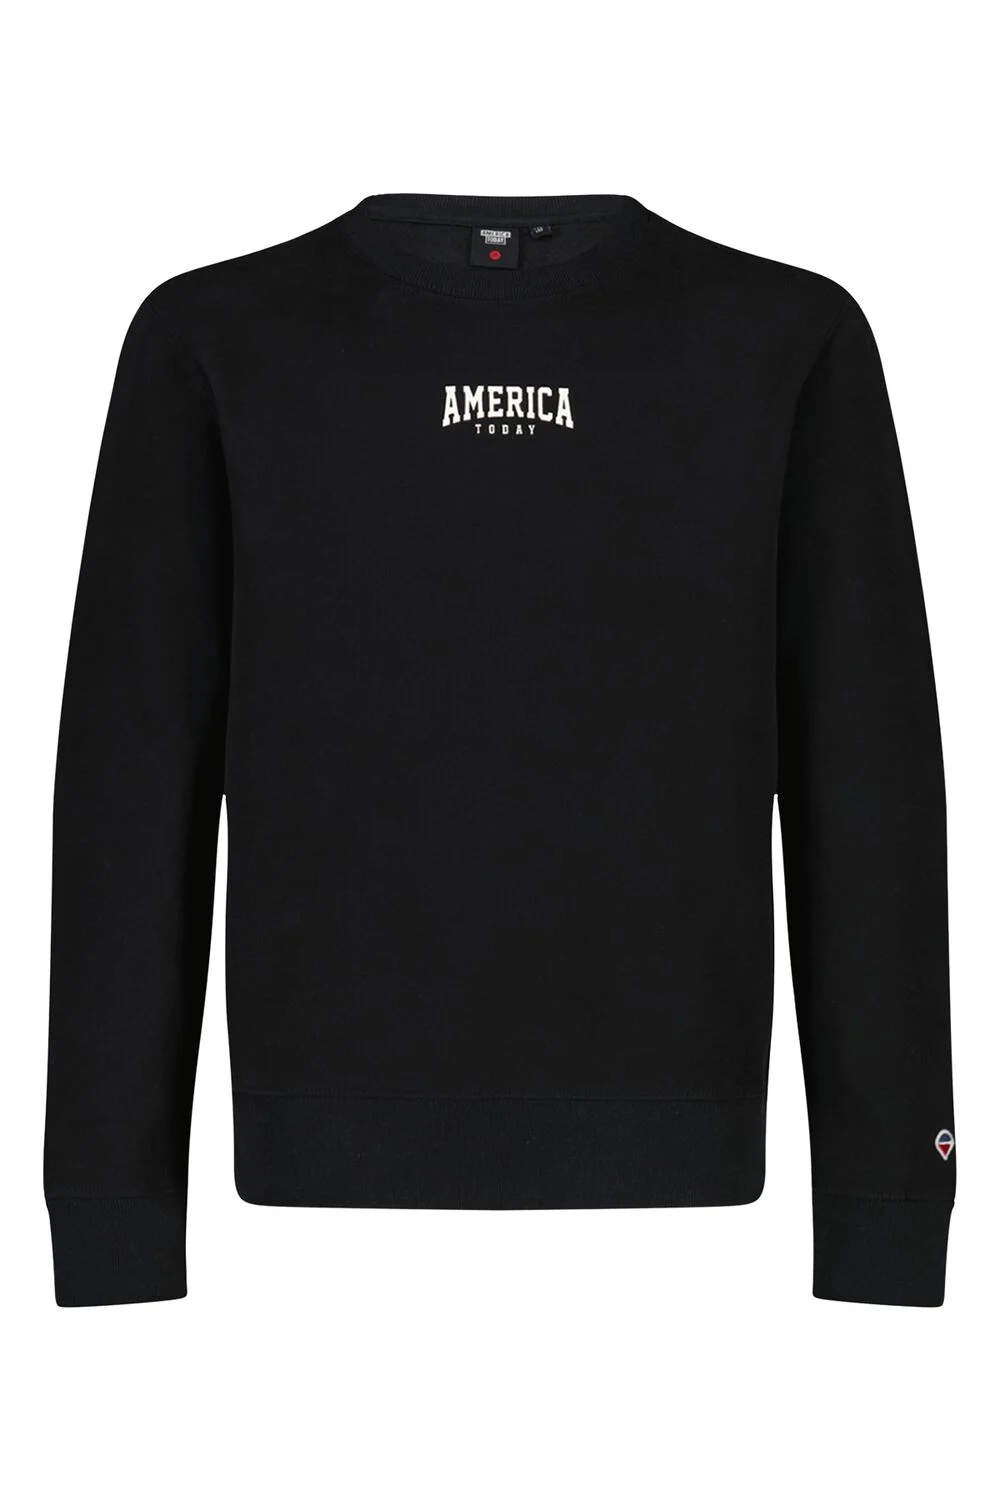 America Today Sweater south crew jr